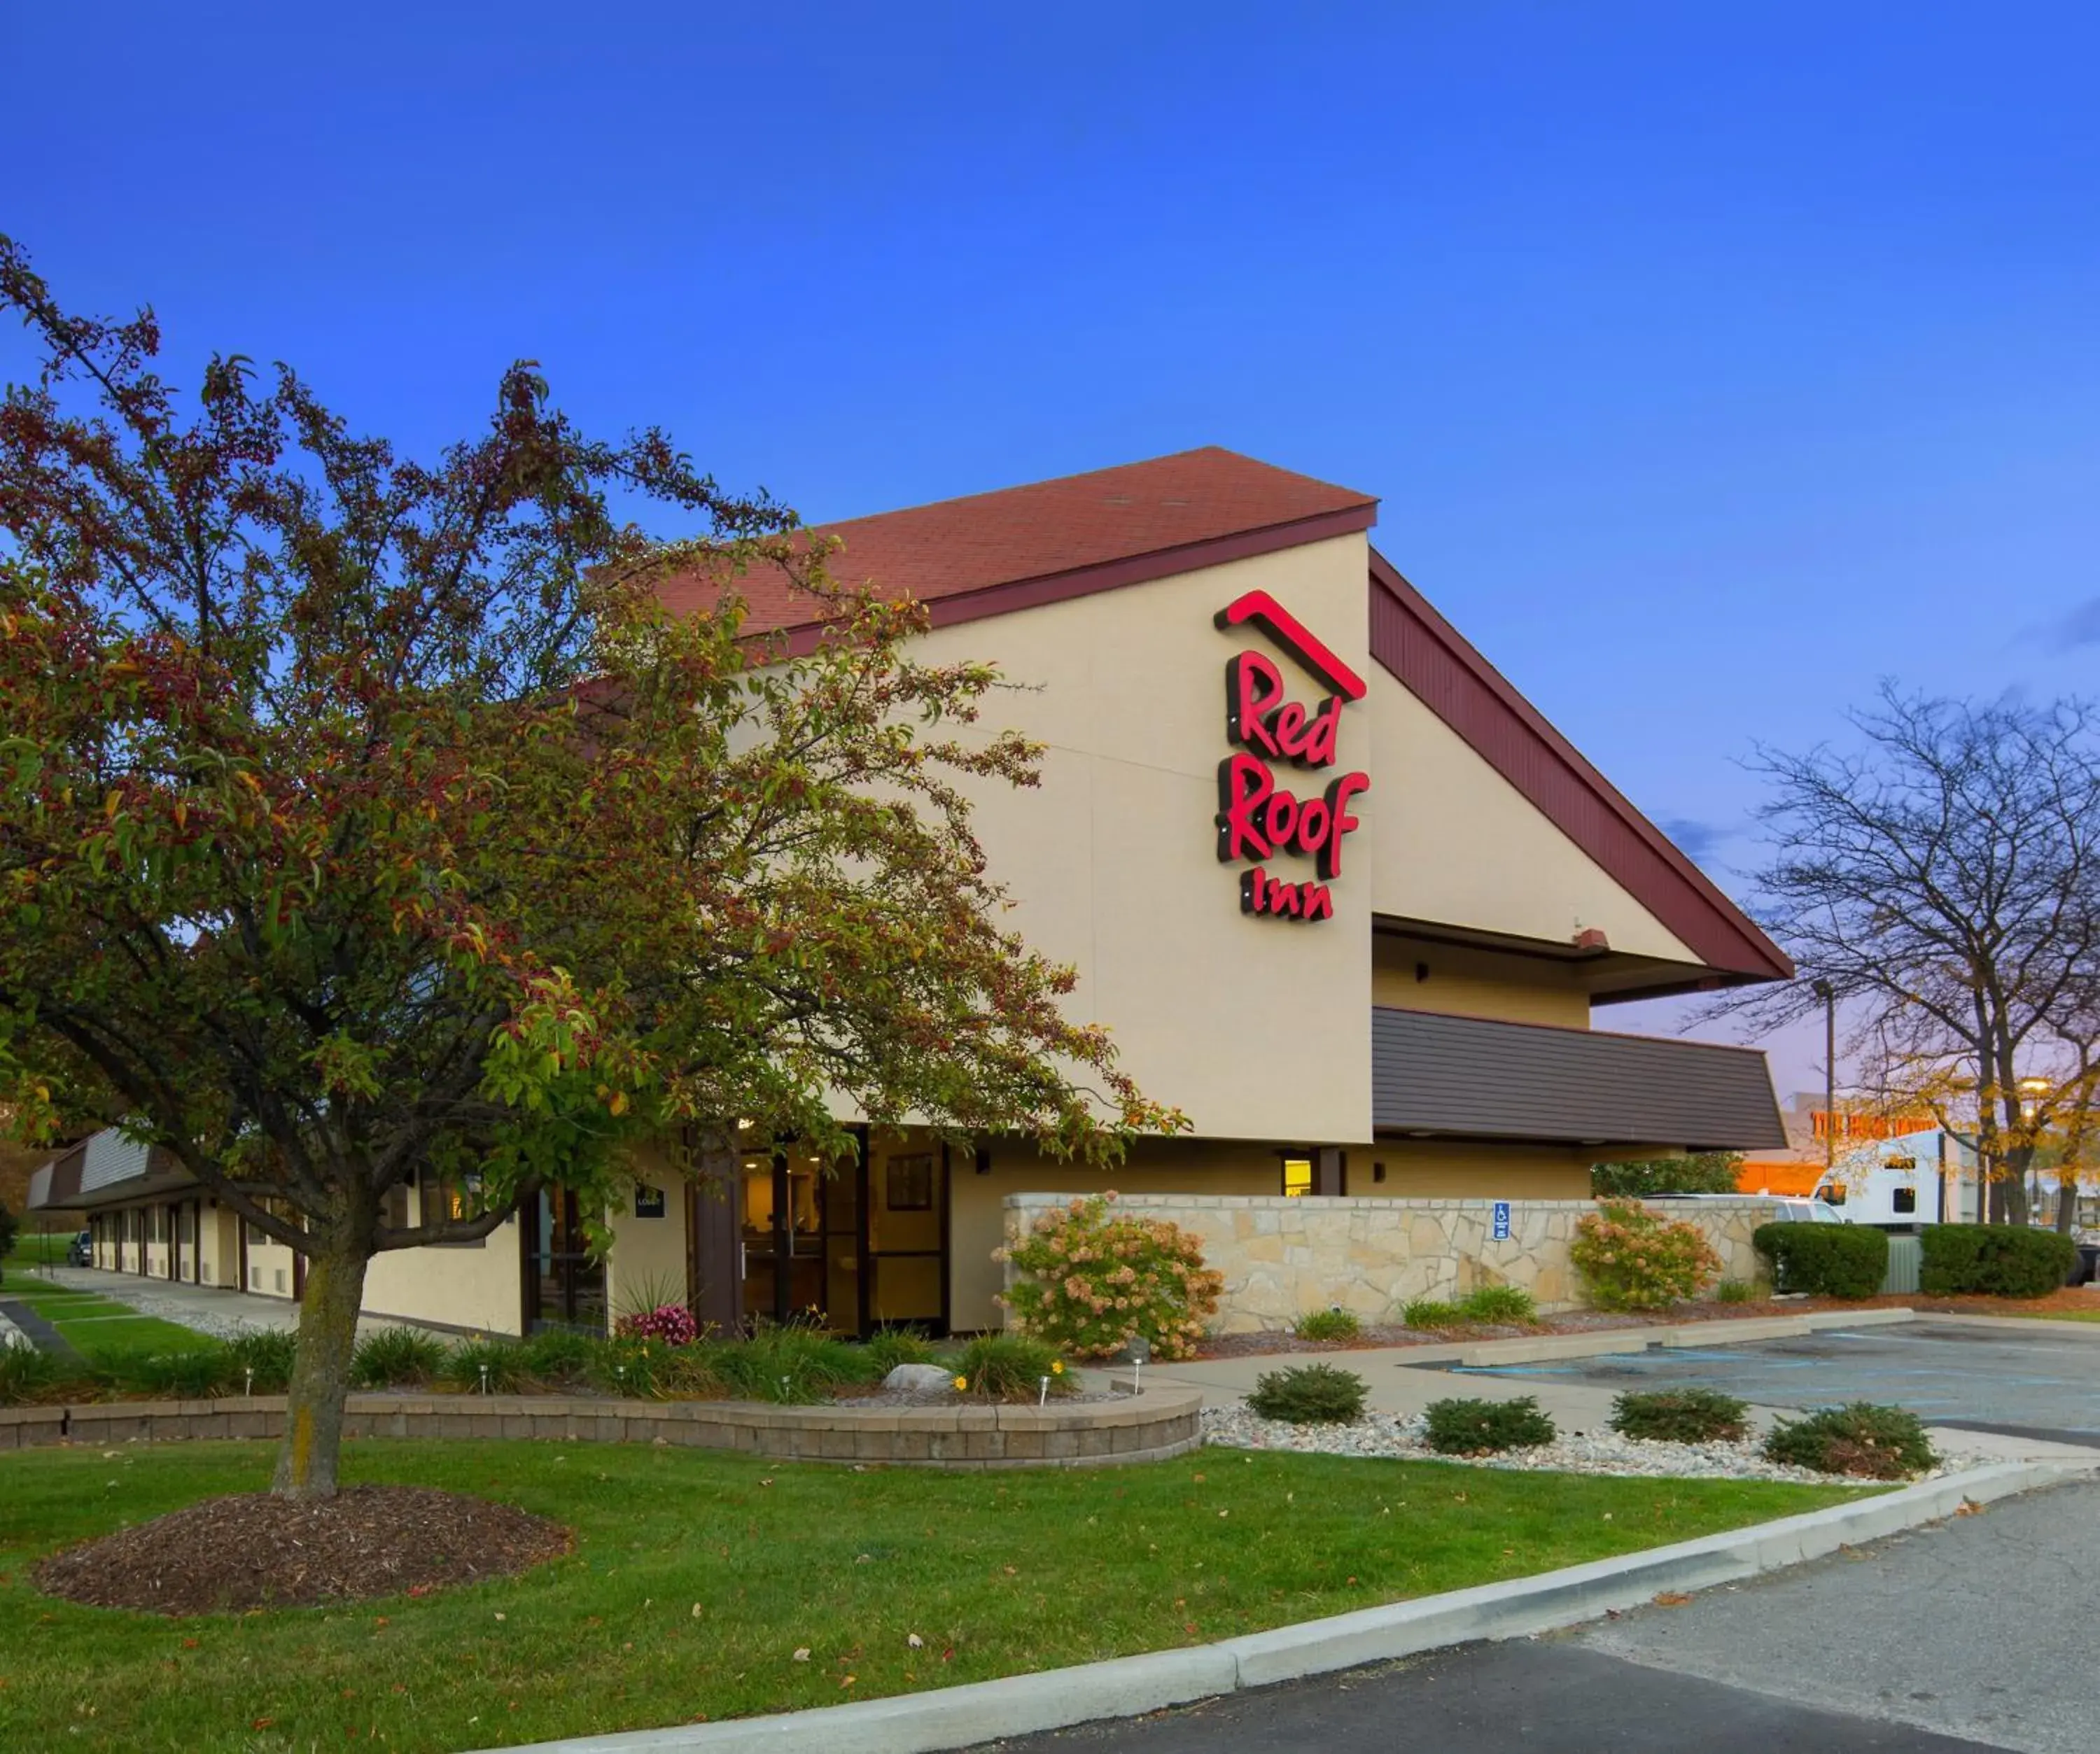 Property Building in Red Roof Inn Detroit Metro Airport - Taylor